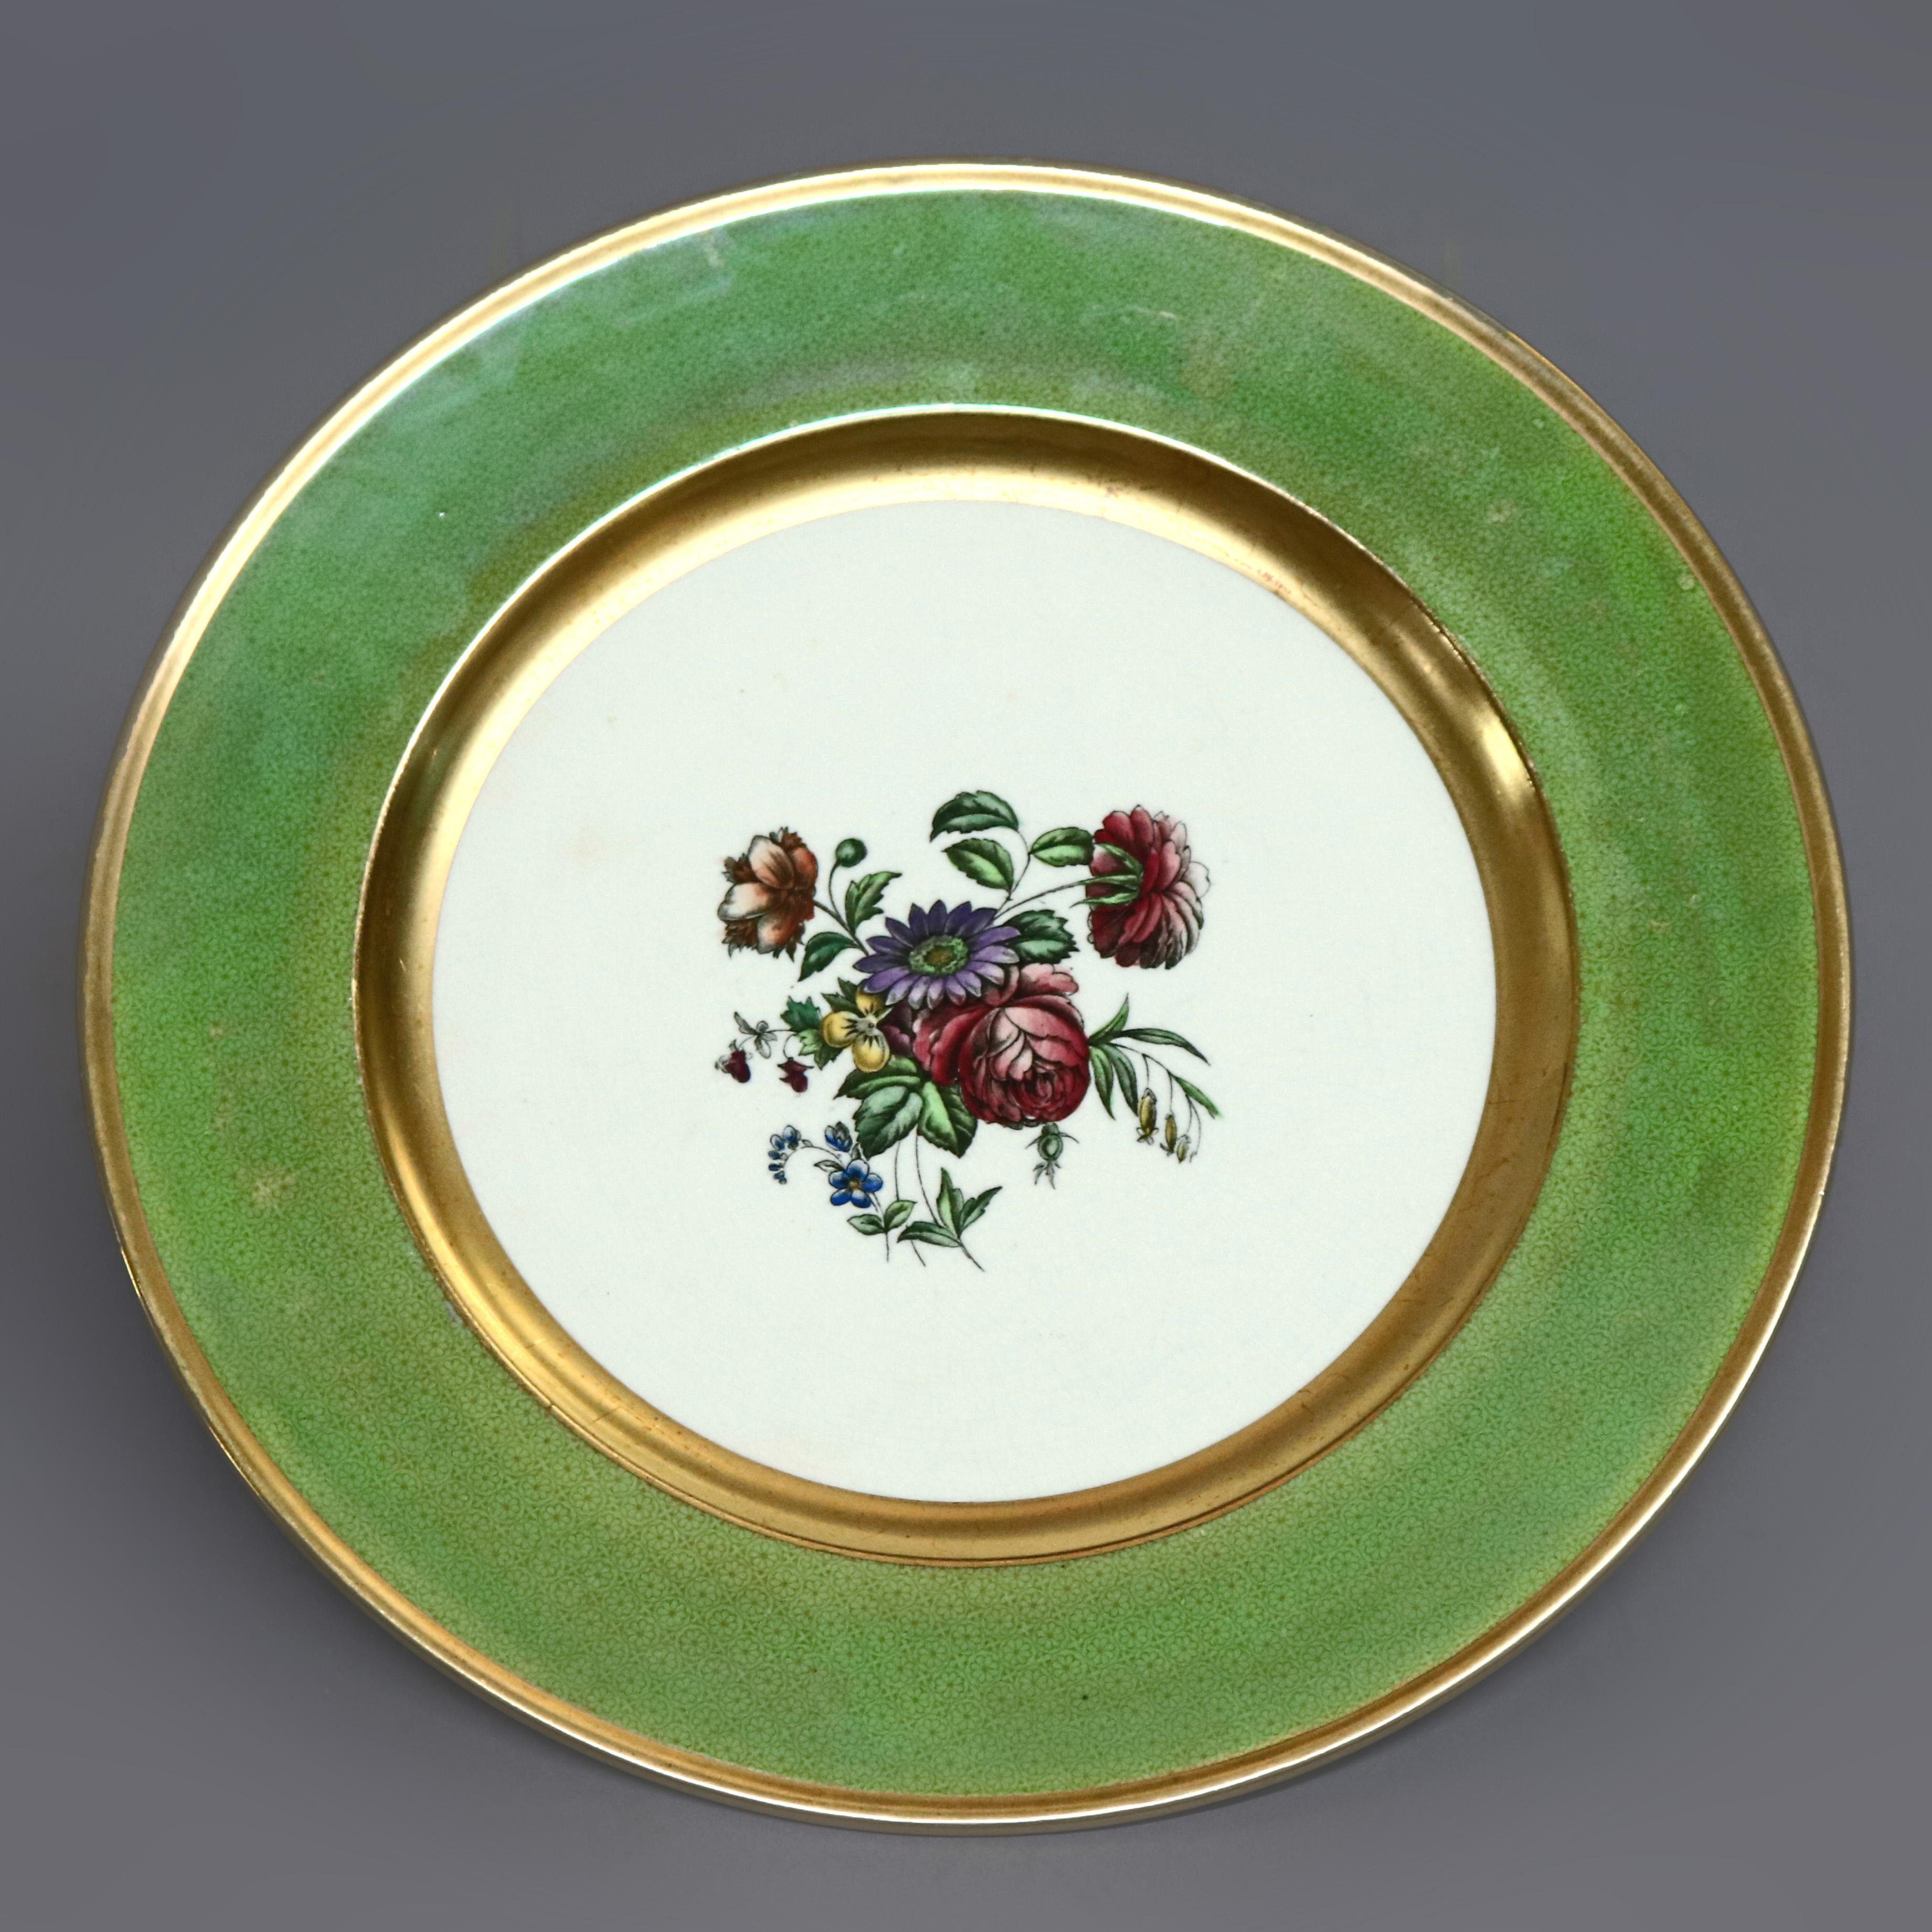 An antique set of 12 English dinner plates by Cauldon offer central floral bouquet with green rim bordered in gilt trimming, en verso maker mark as photographed, circa 1920.

Measures: 10.25